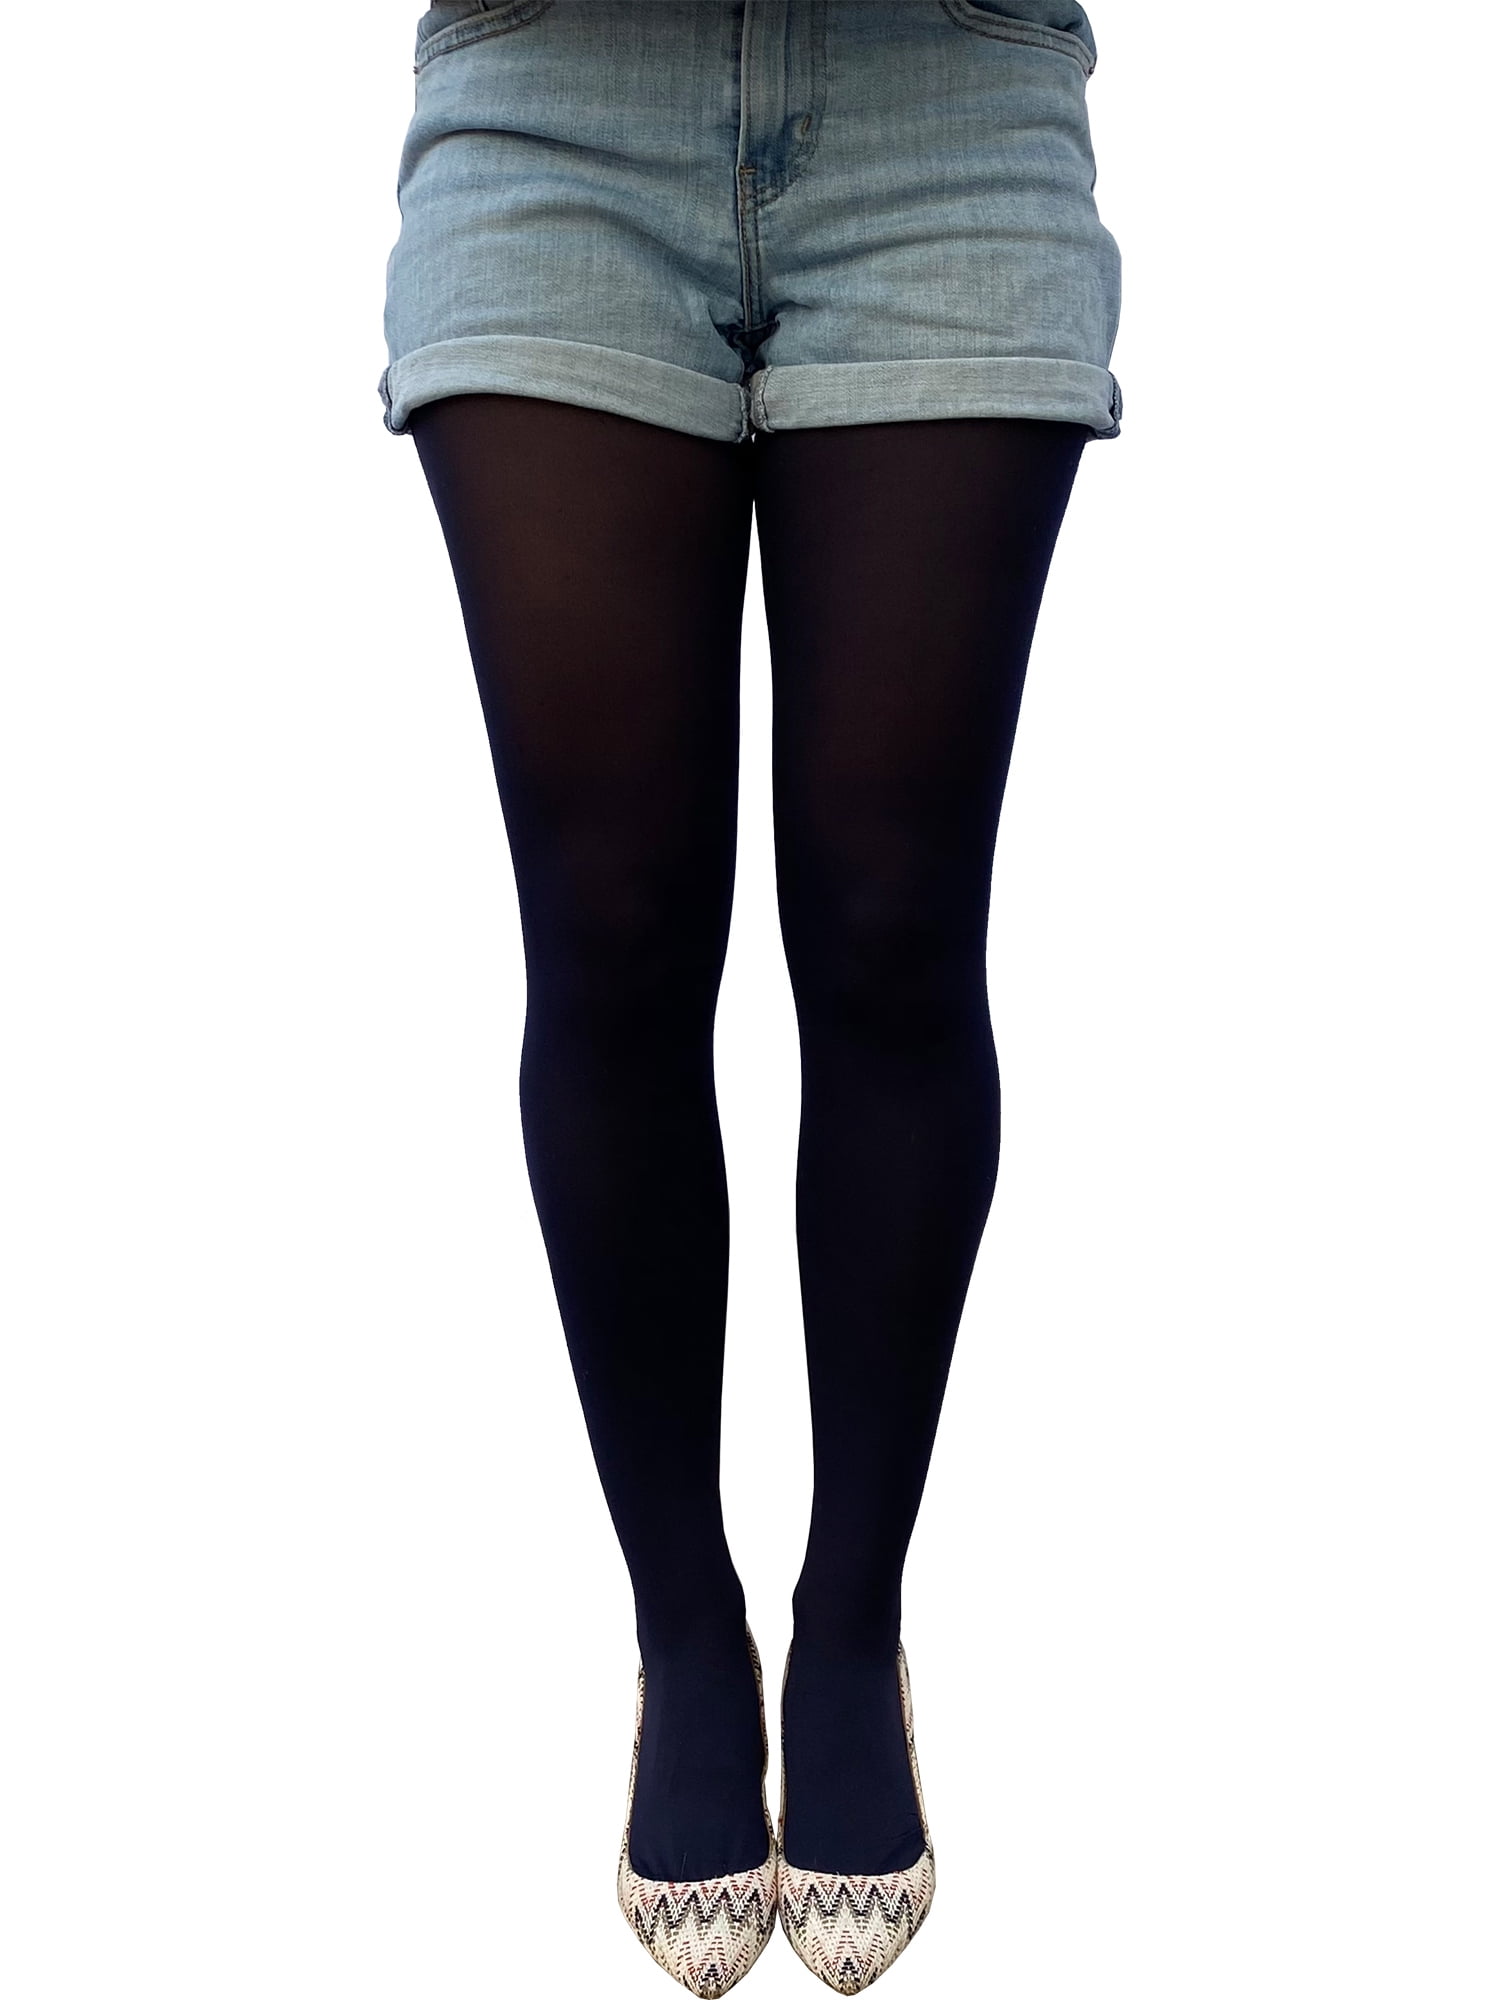 Navy Blue Opaque Full Footed Tights 80D, Pantyhose for Women 